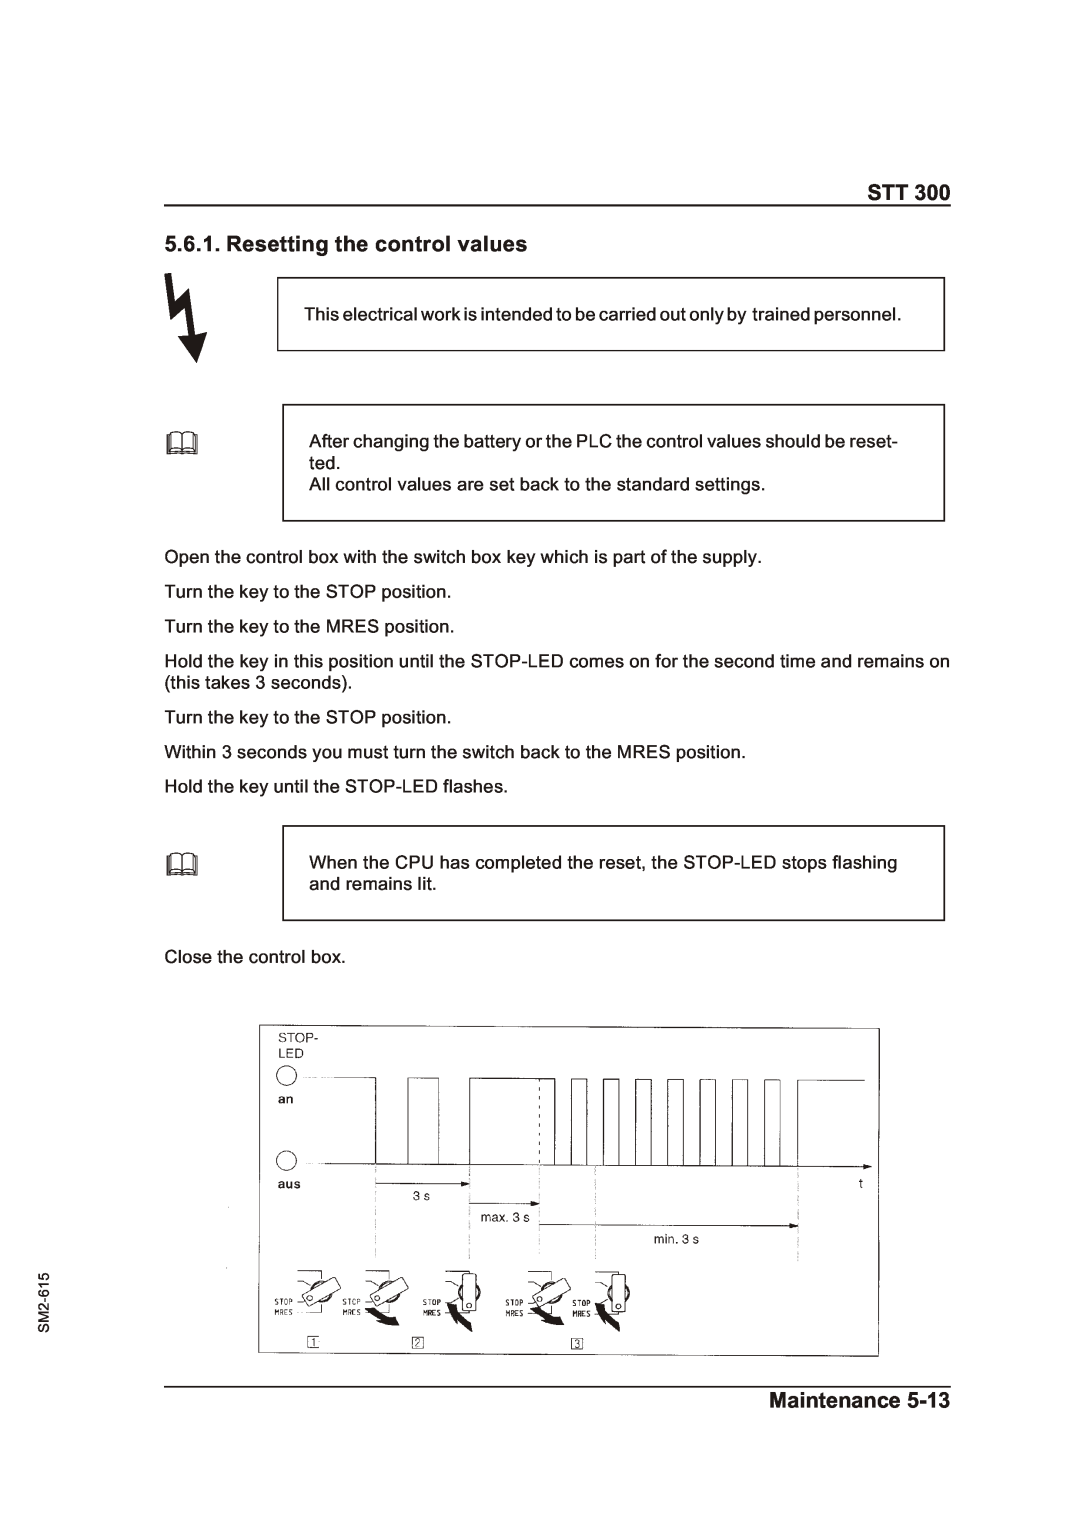 Sterling STT 300 operating instructions STT 5.6.1. Resetting the control values, Maintenance 